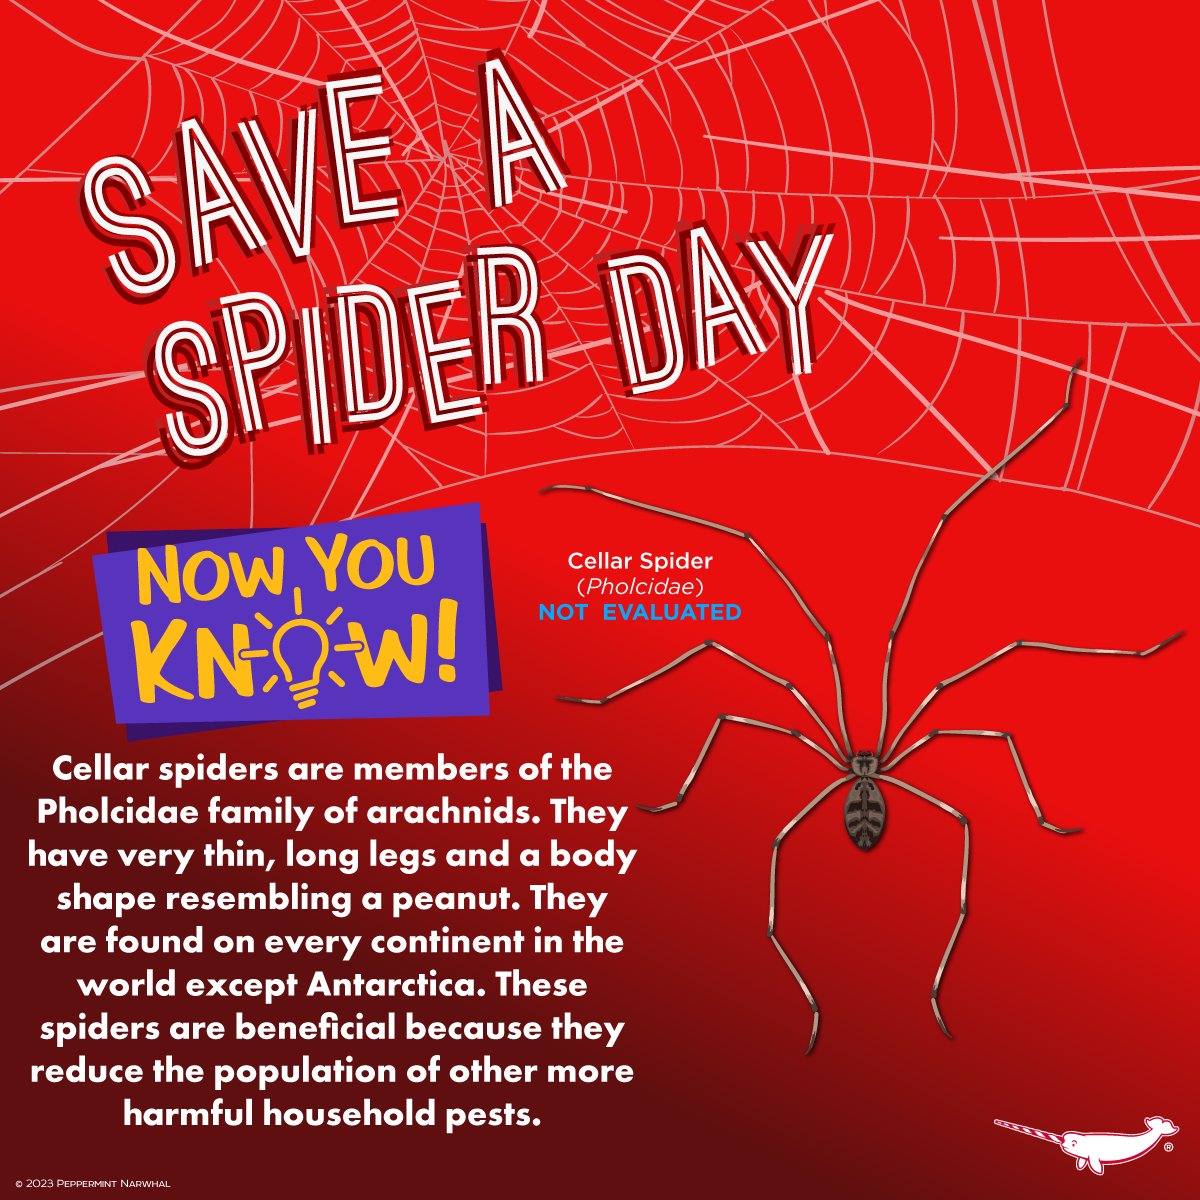 #SaveASpiderDay #NowYouKnow #CellarSpider 

Shop the #PeppermintNarwhal store:
peppermintnarwhal.com

#PhocidSpider #Spider #Pholcidae